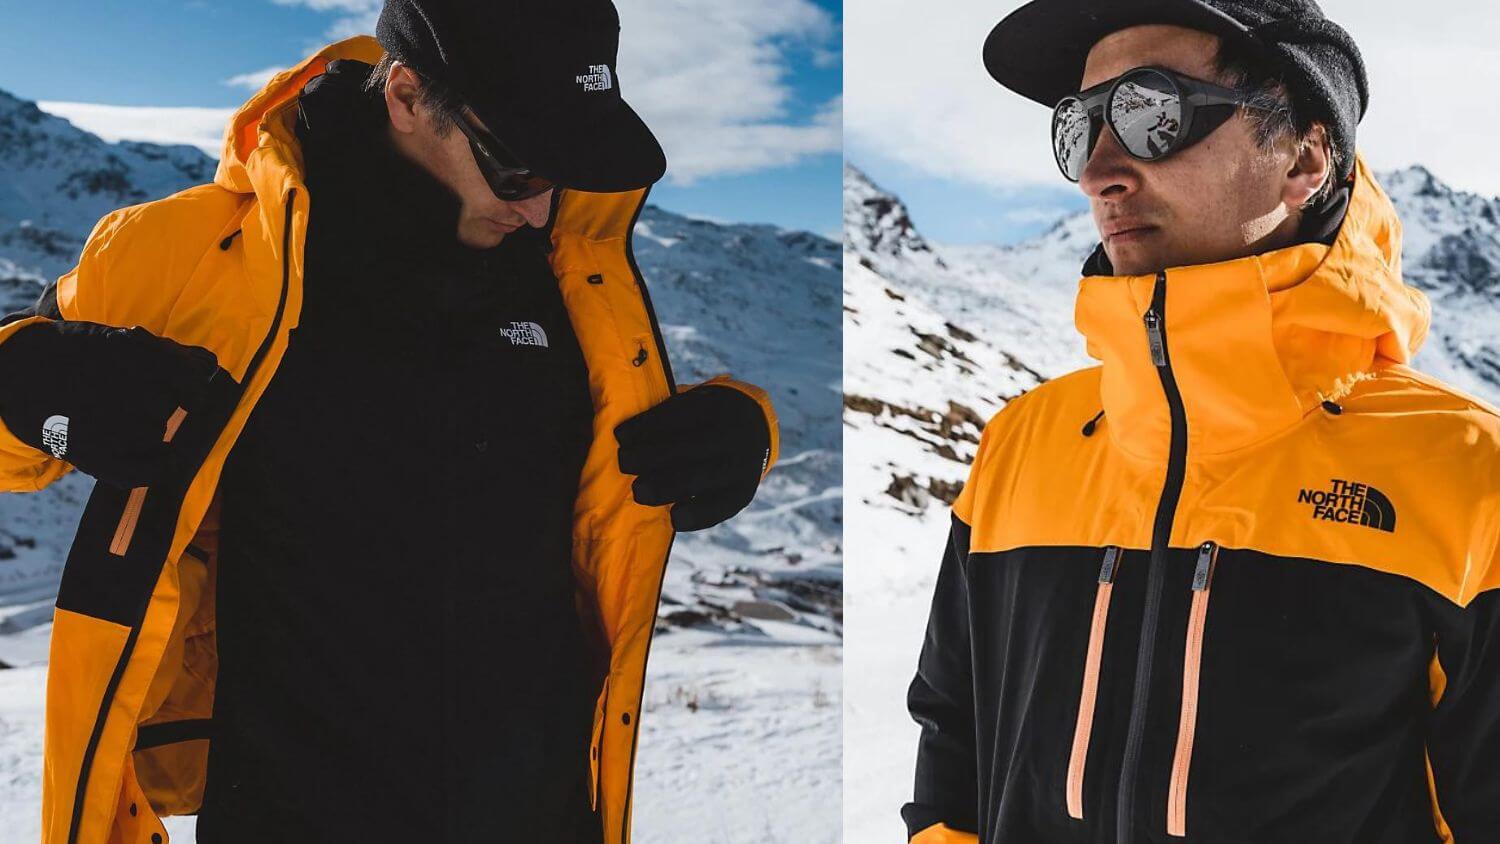 Is North Face Good For Ski or Snowboard Wear? - uGOsnow